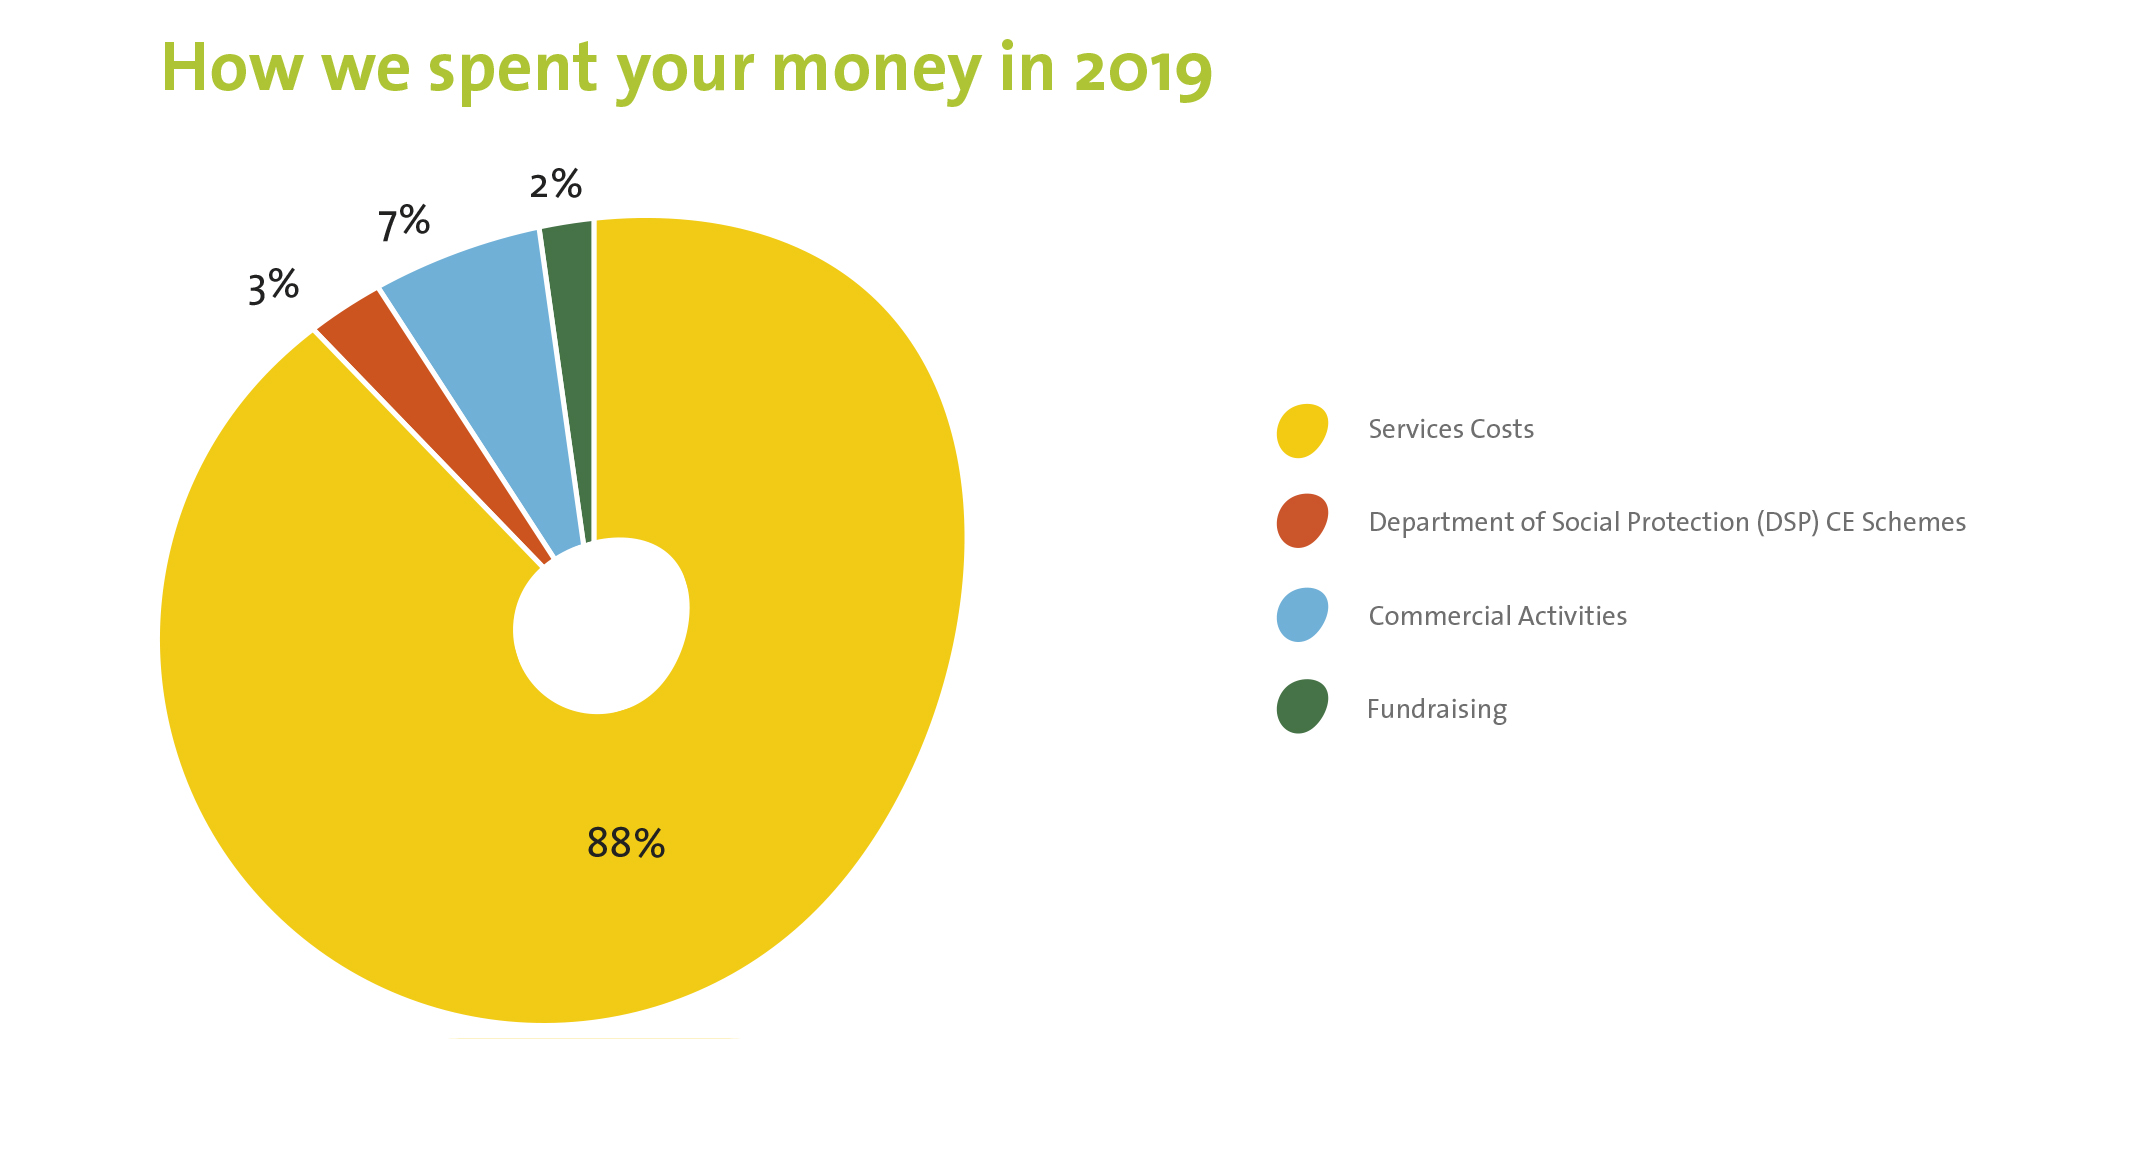 Pie chart showing how funds were spent in 2019